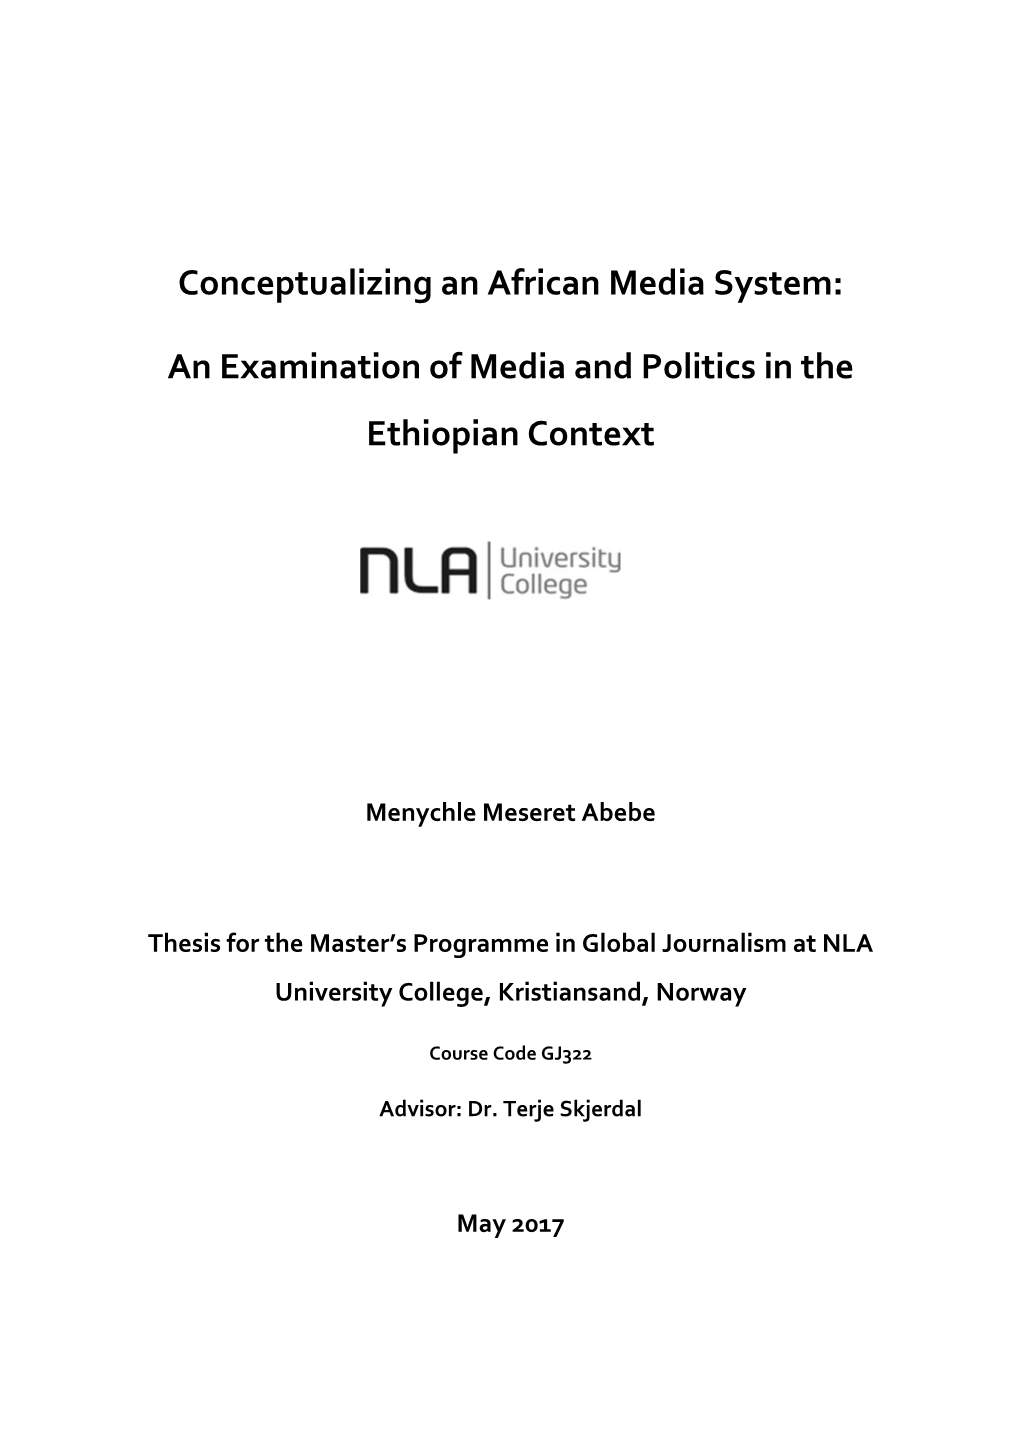 An Examination of Media and Politics in the Ethiopian Context